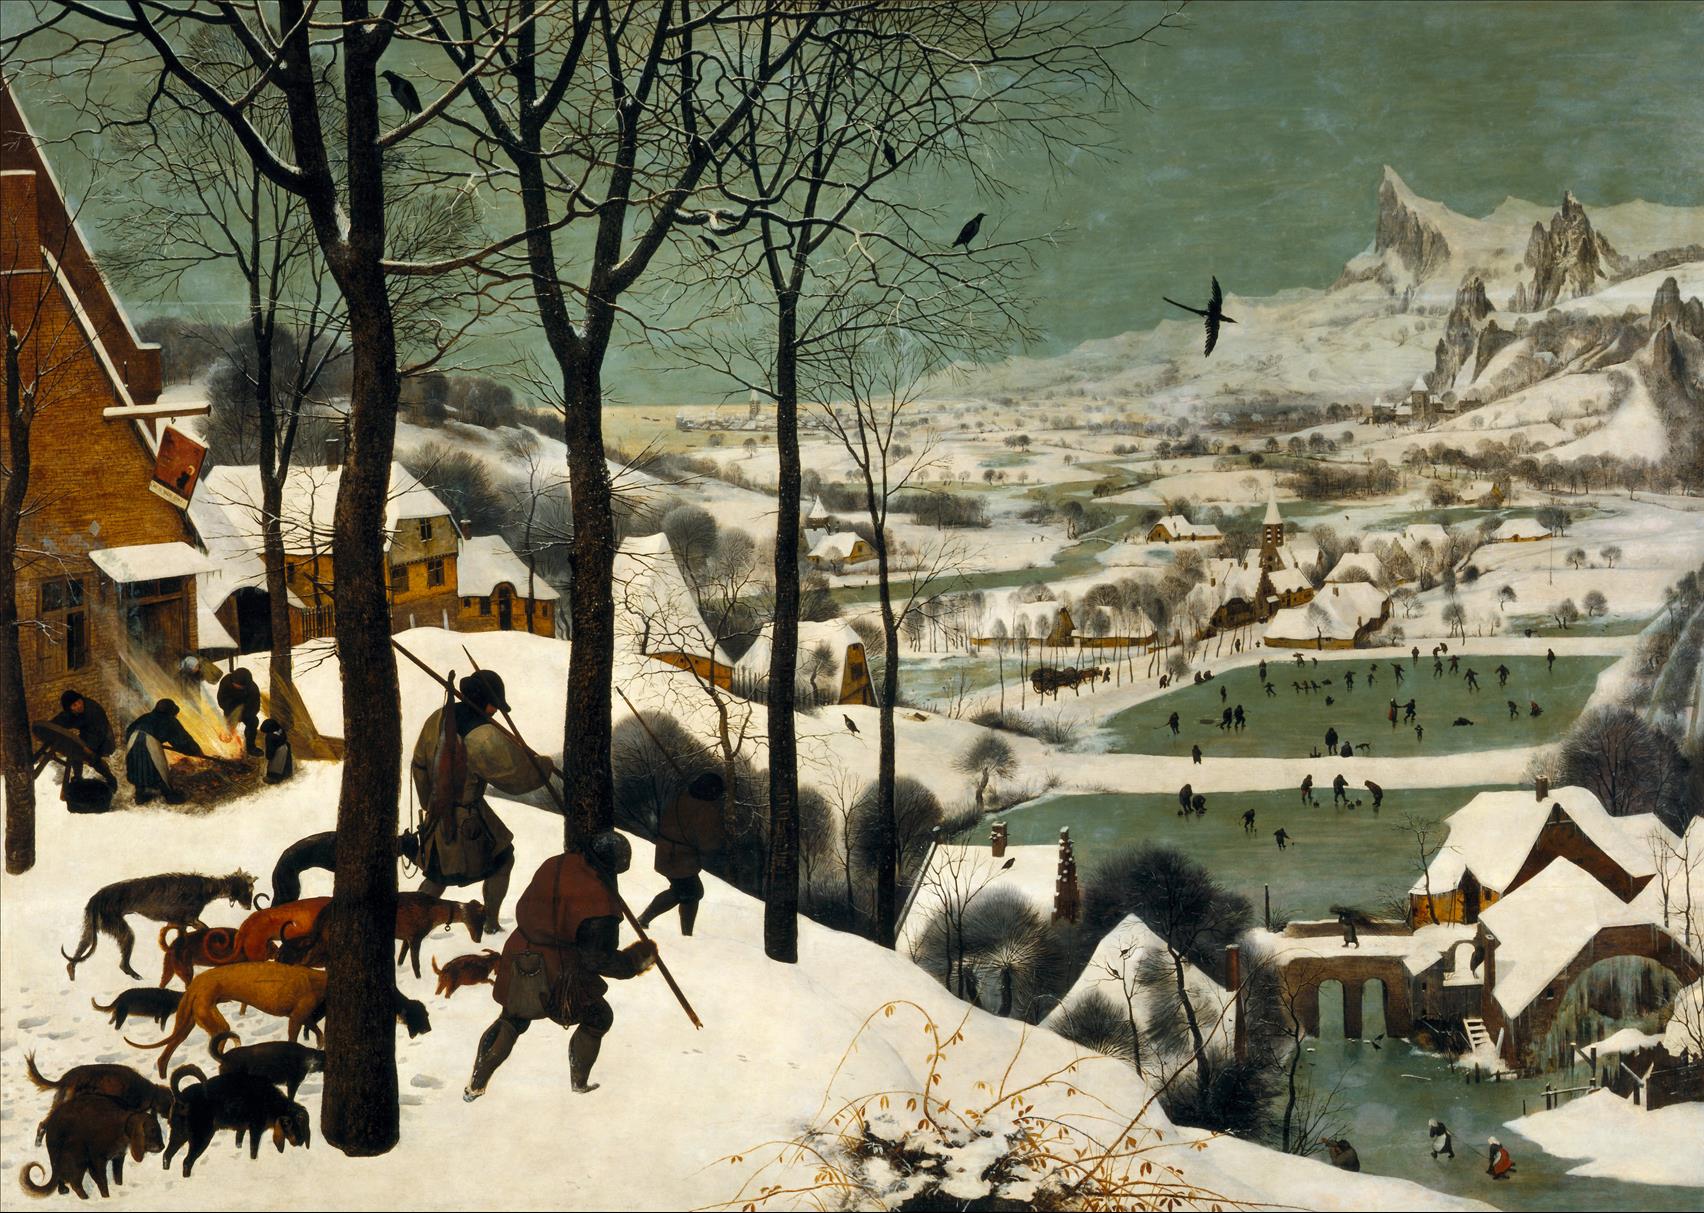 Small climate changes can have devastating local consequences it happened in the Little Ice Age